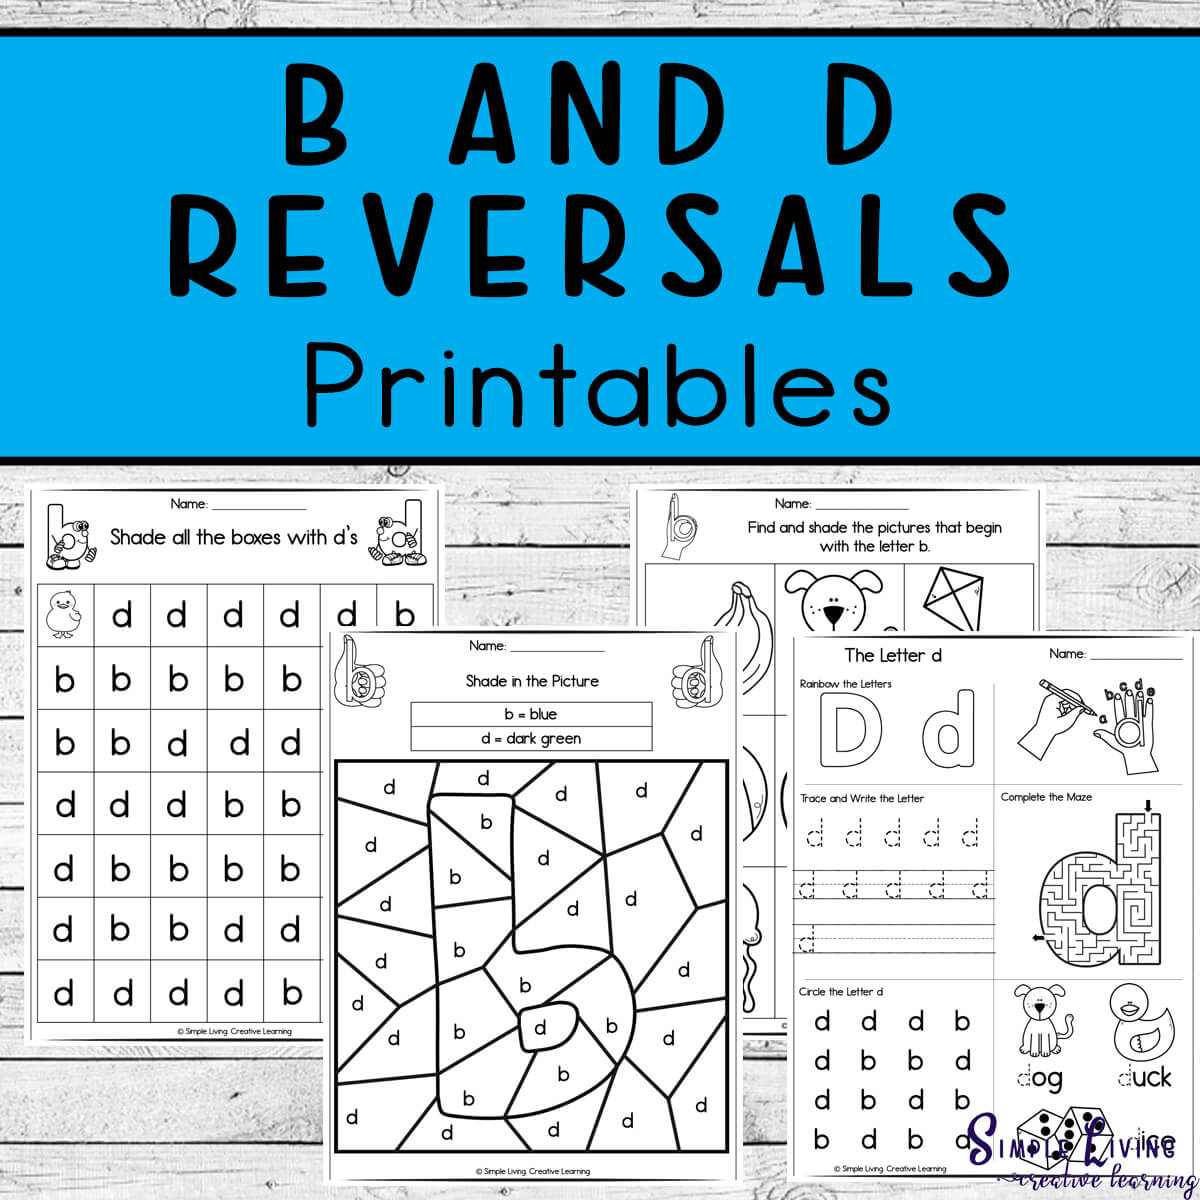 b and d Reversal Printables four pages